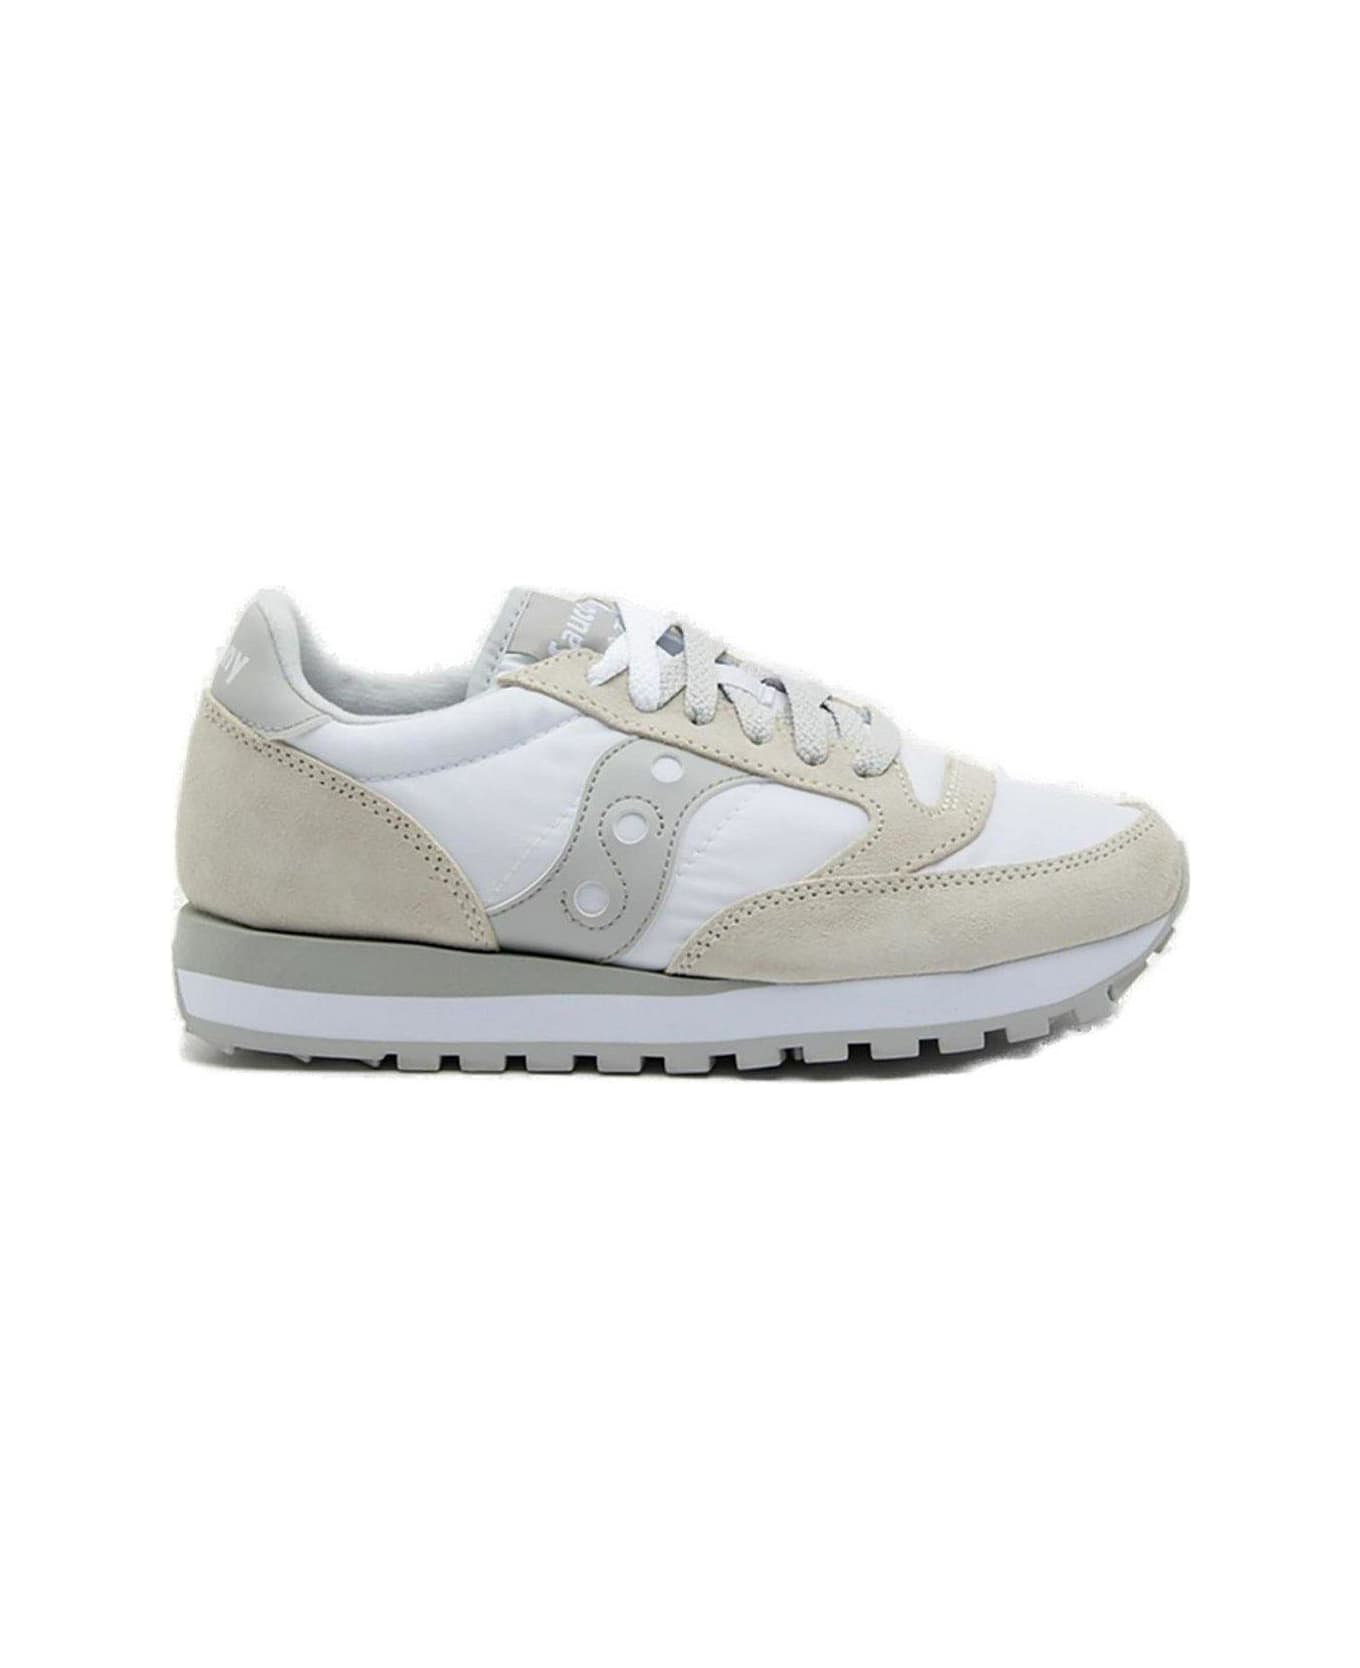 Saucony Jazz Original Lace-up Sneakers - White/grey スニーカー